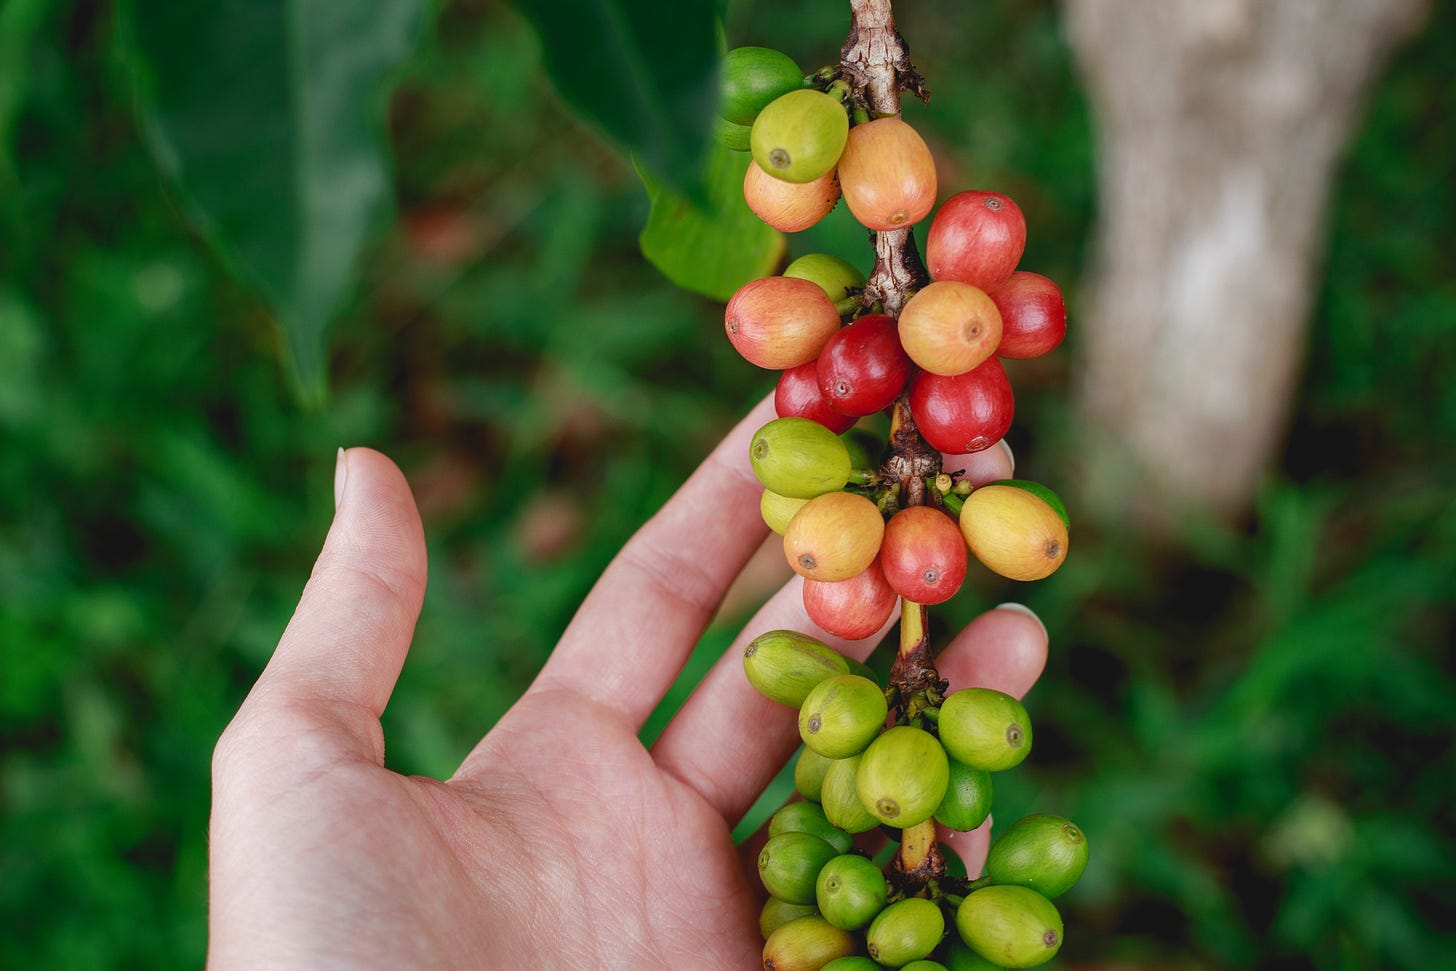 A hand holding coffee cherries still on the vine towards the camera.